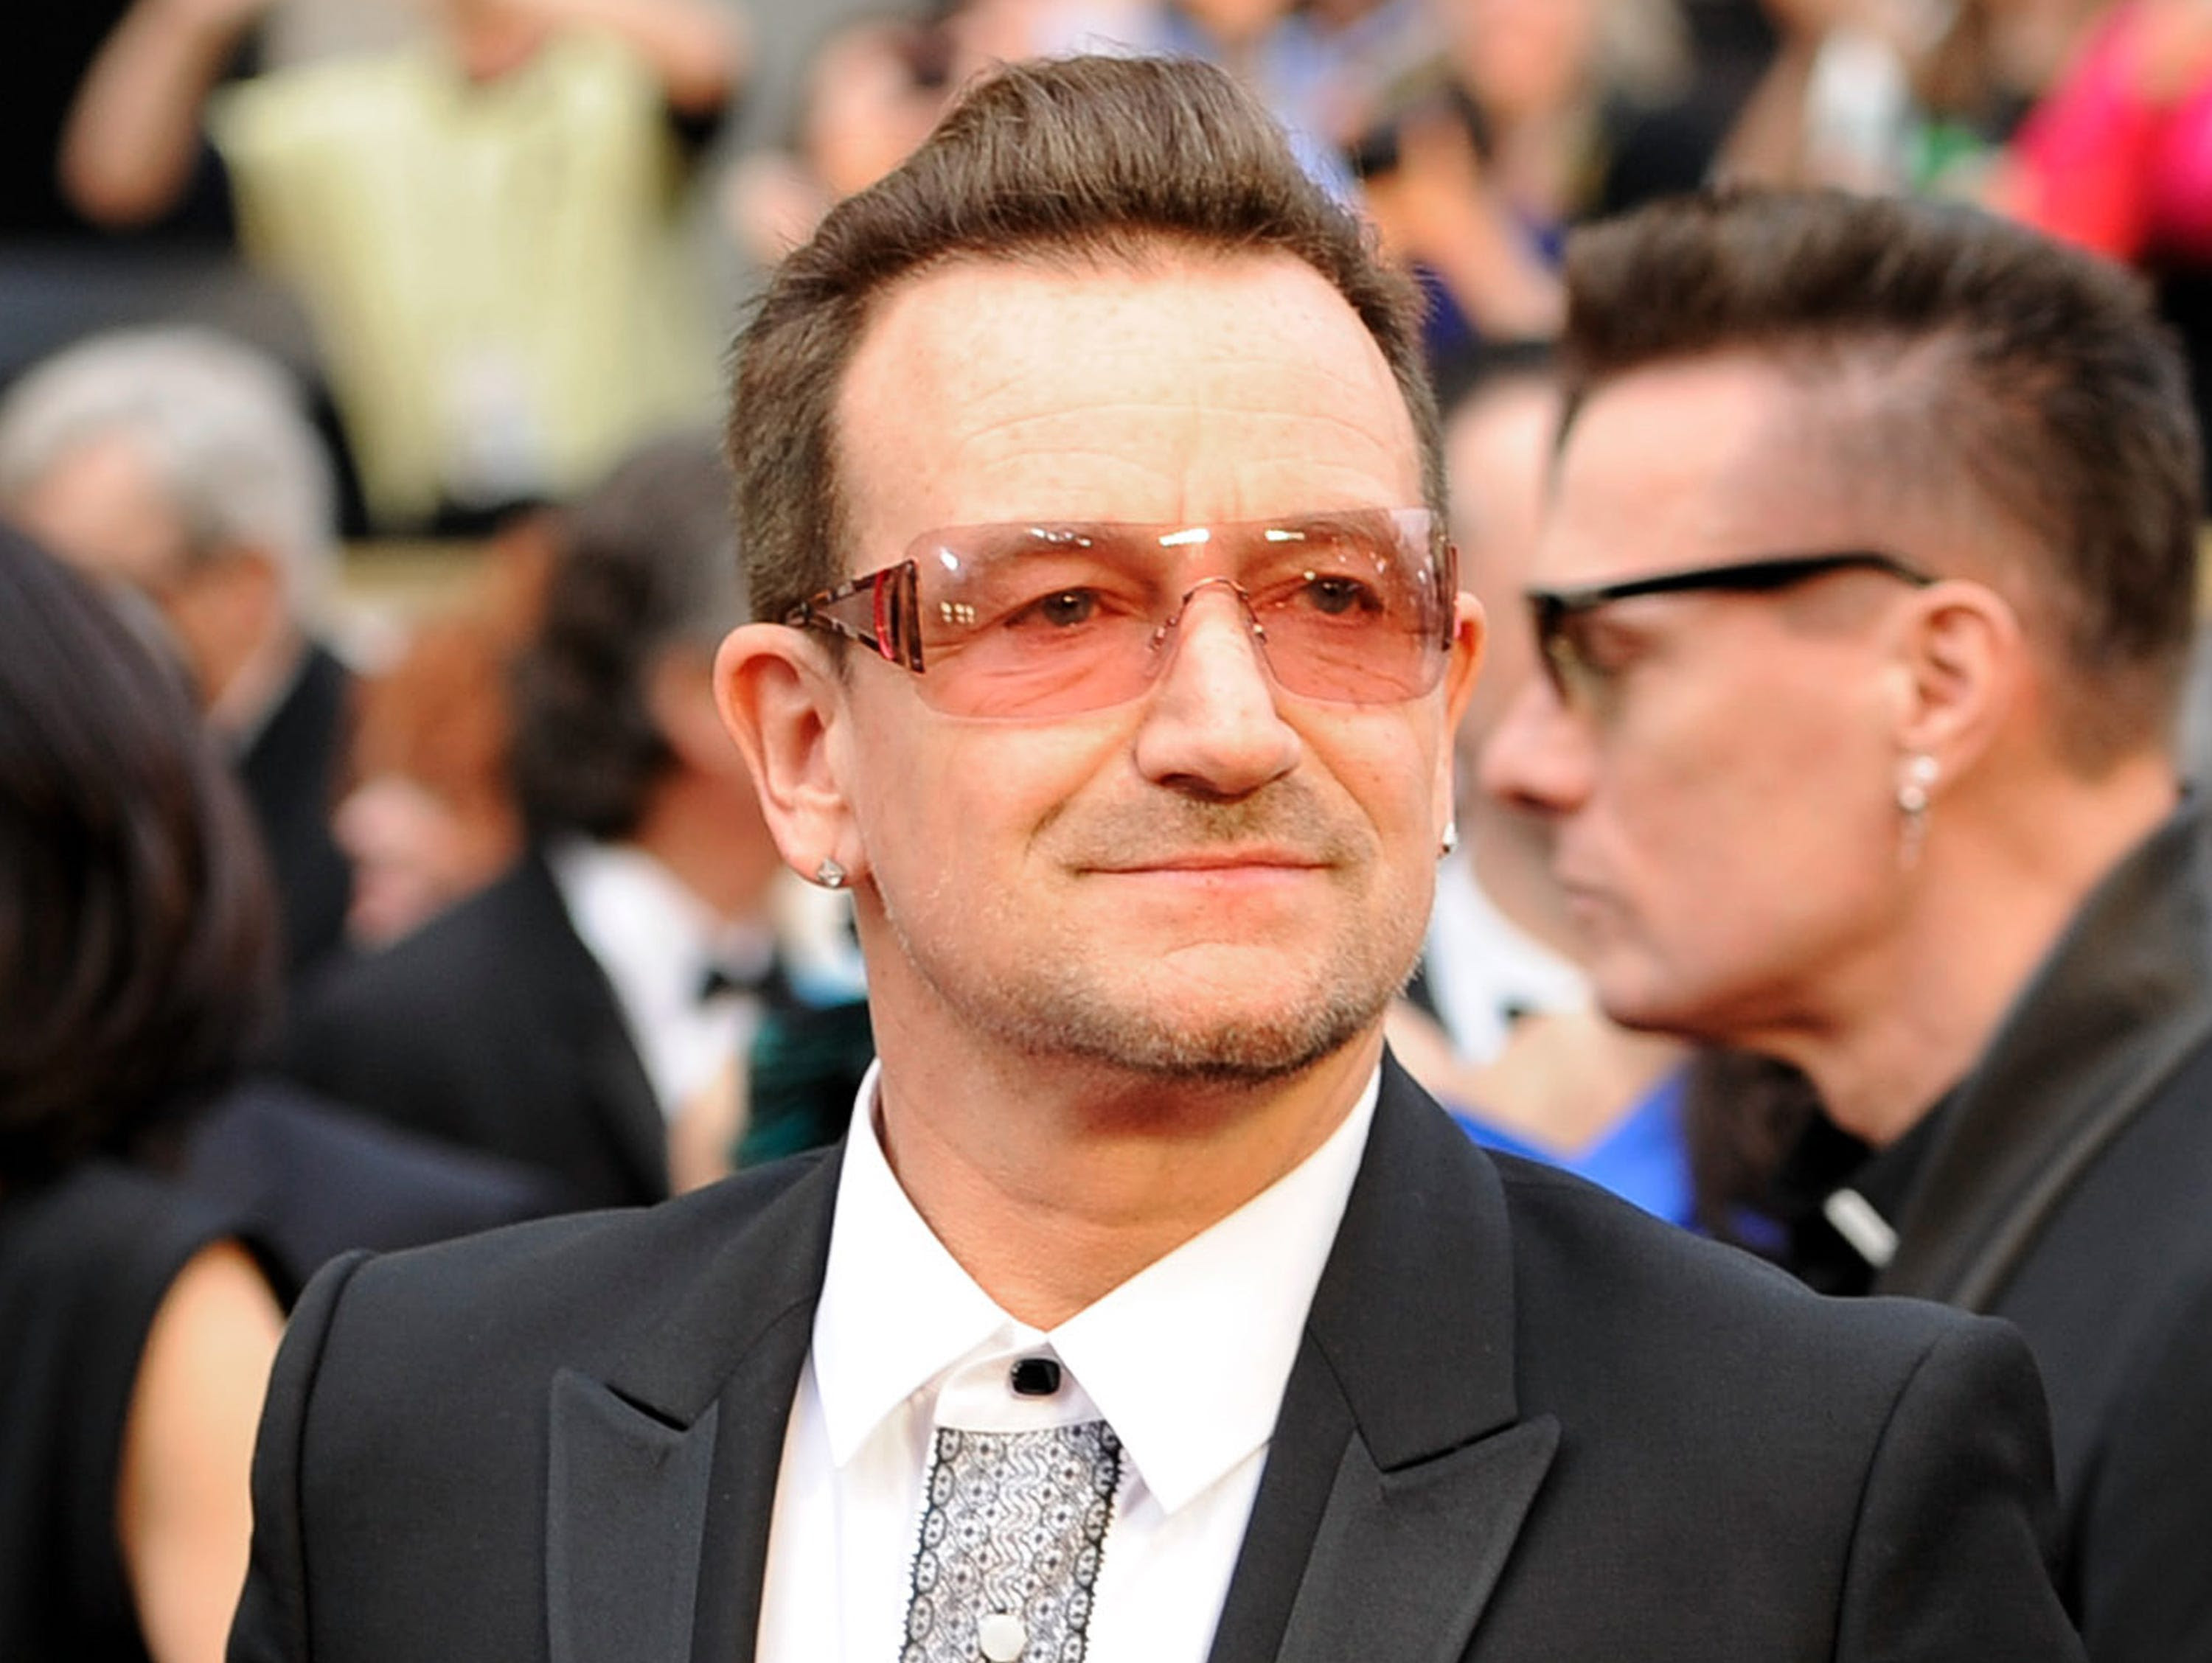 Bono arrives at the Oscars at the Dolby Theatre in Los Angeles in March. A New York City doctor says U2 singer Bono suffered multiple fractures and had to have two surgeries after his weekend bicycle accident.